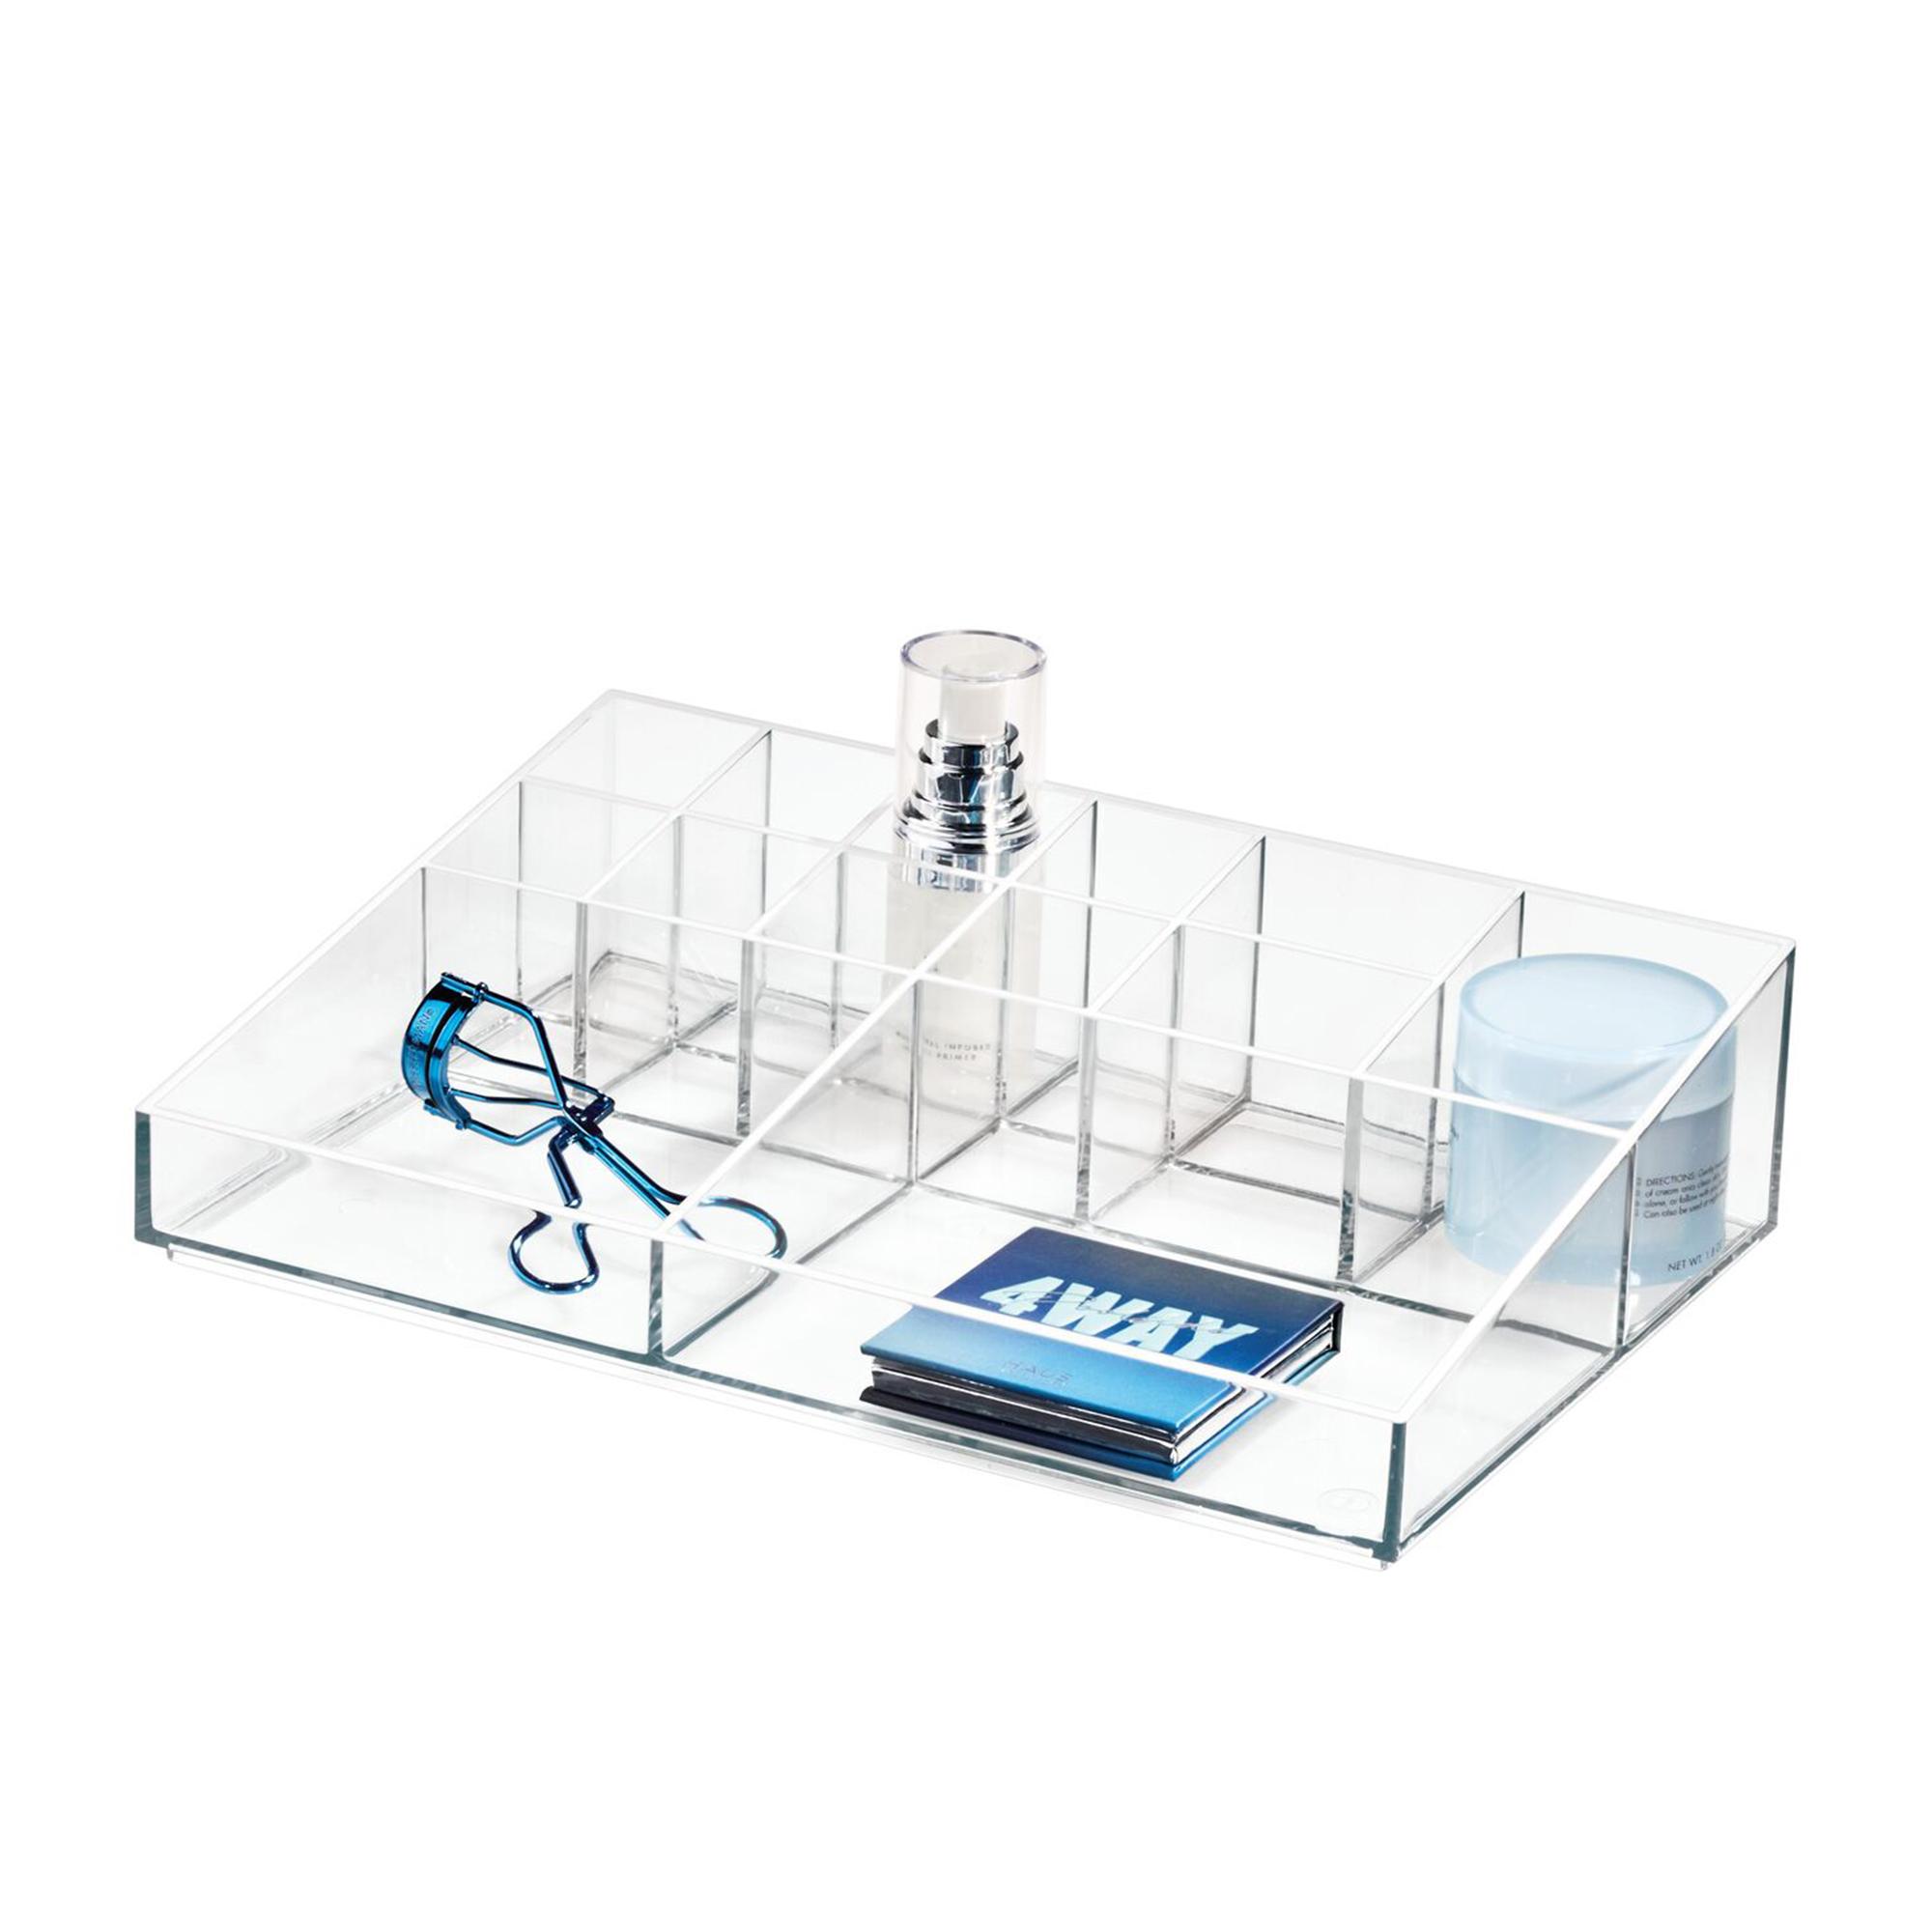 Sarah Tanno by iDesign Lip Station Organiser Clear Image 5